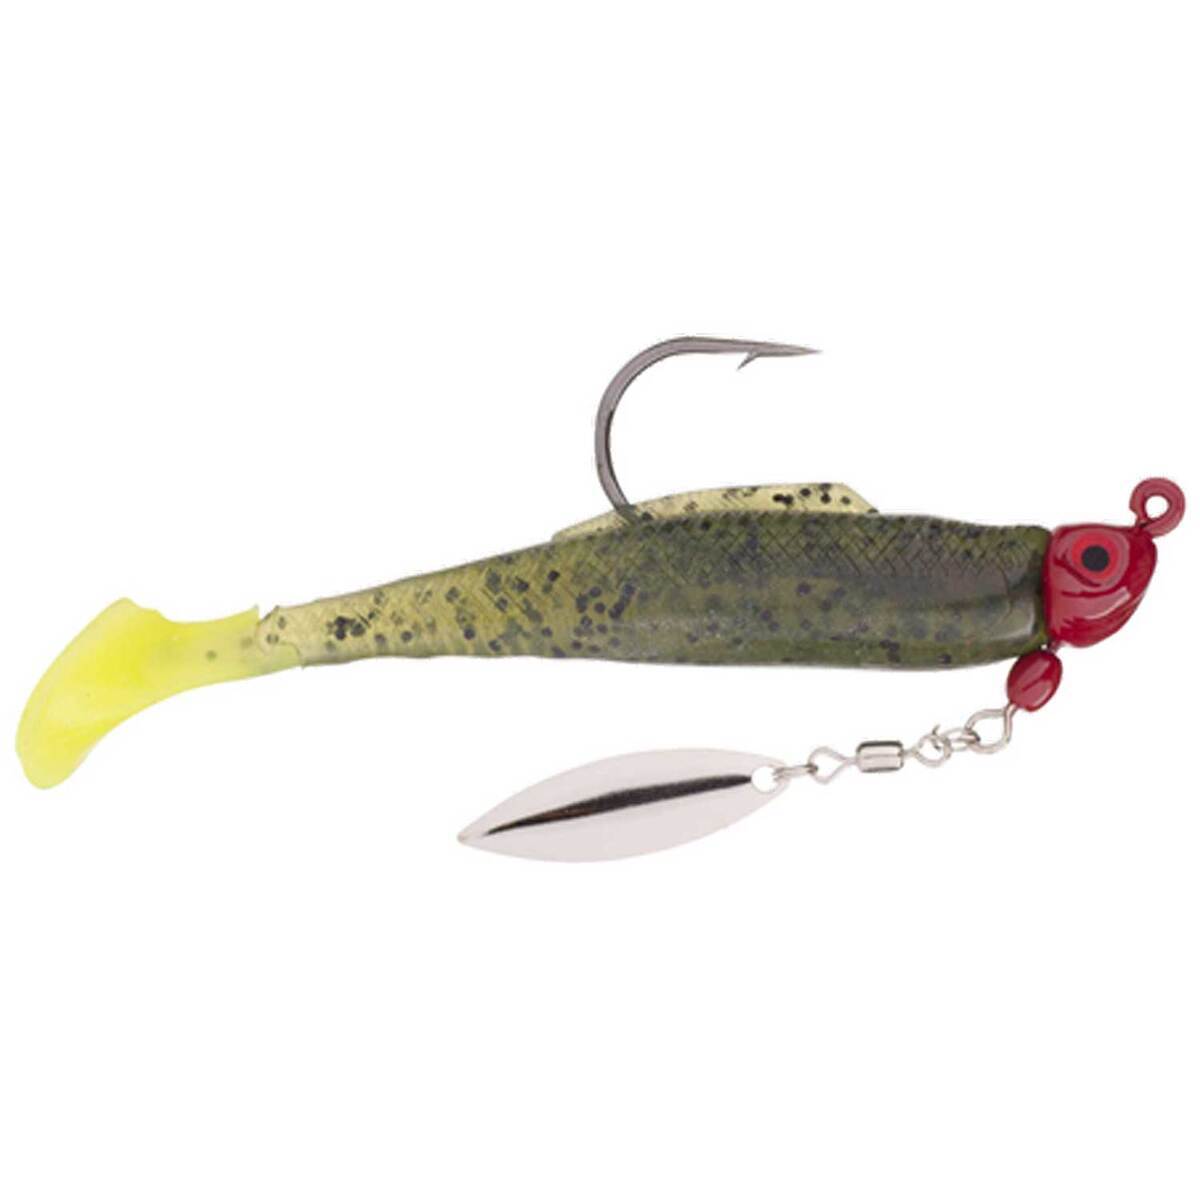 Strike King Speckled Trout Magic - Black Neon Chartreuse Tail - 1/4 oz.